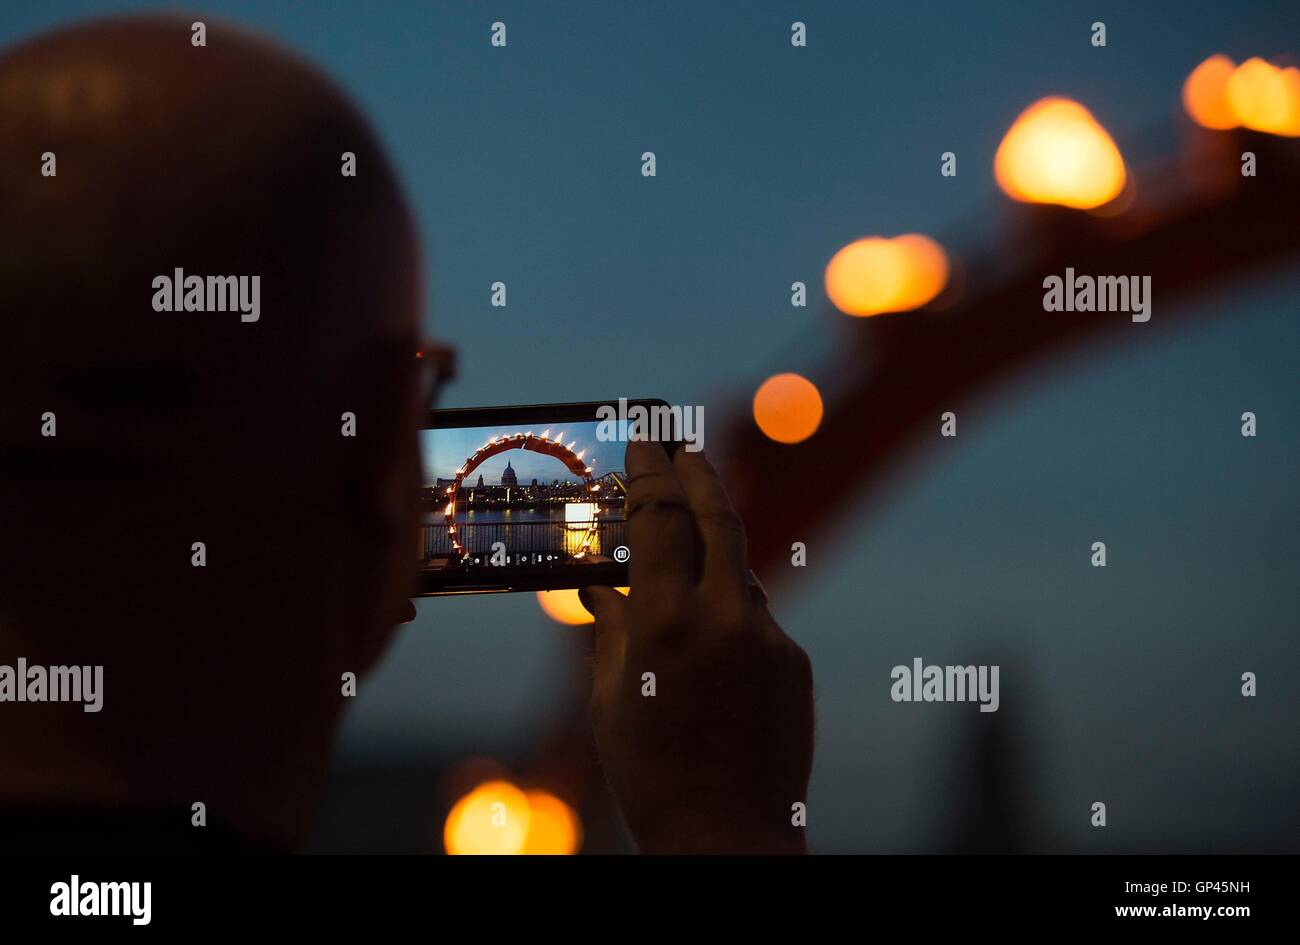 A man photographs a burning structure as part of 'Fire Garden' by Compagnie Carabosse, in front of the Tate Modern in London to mark the 350th anniversary of the Great Fire of London. Stock Photo